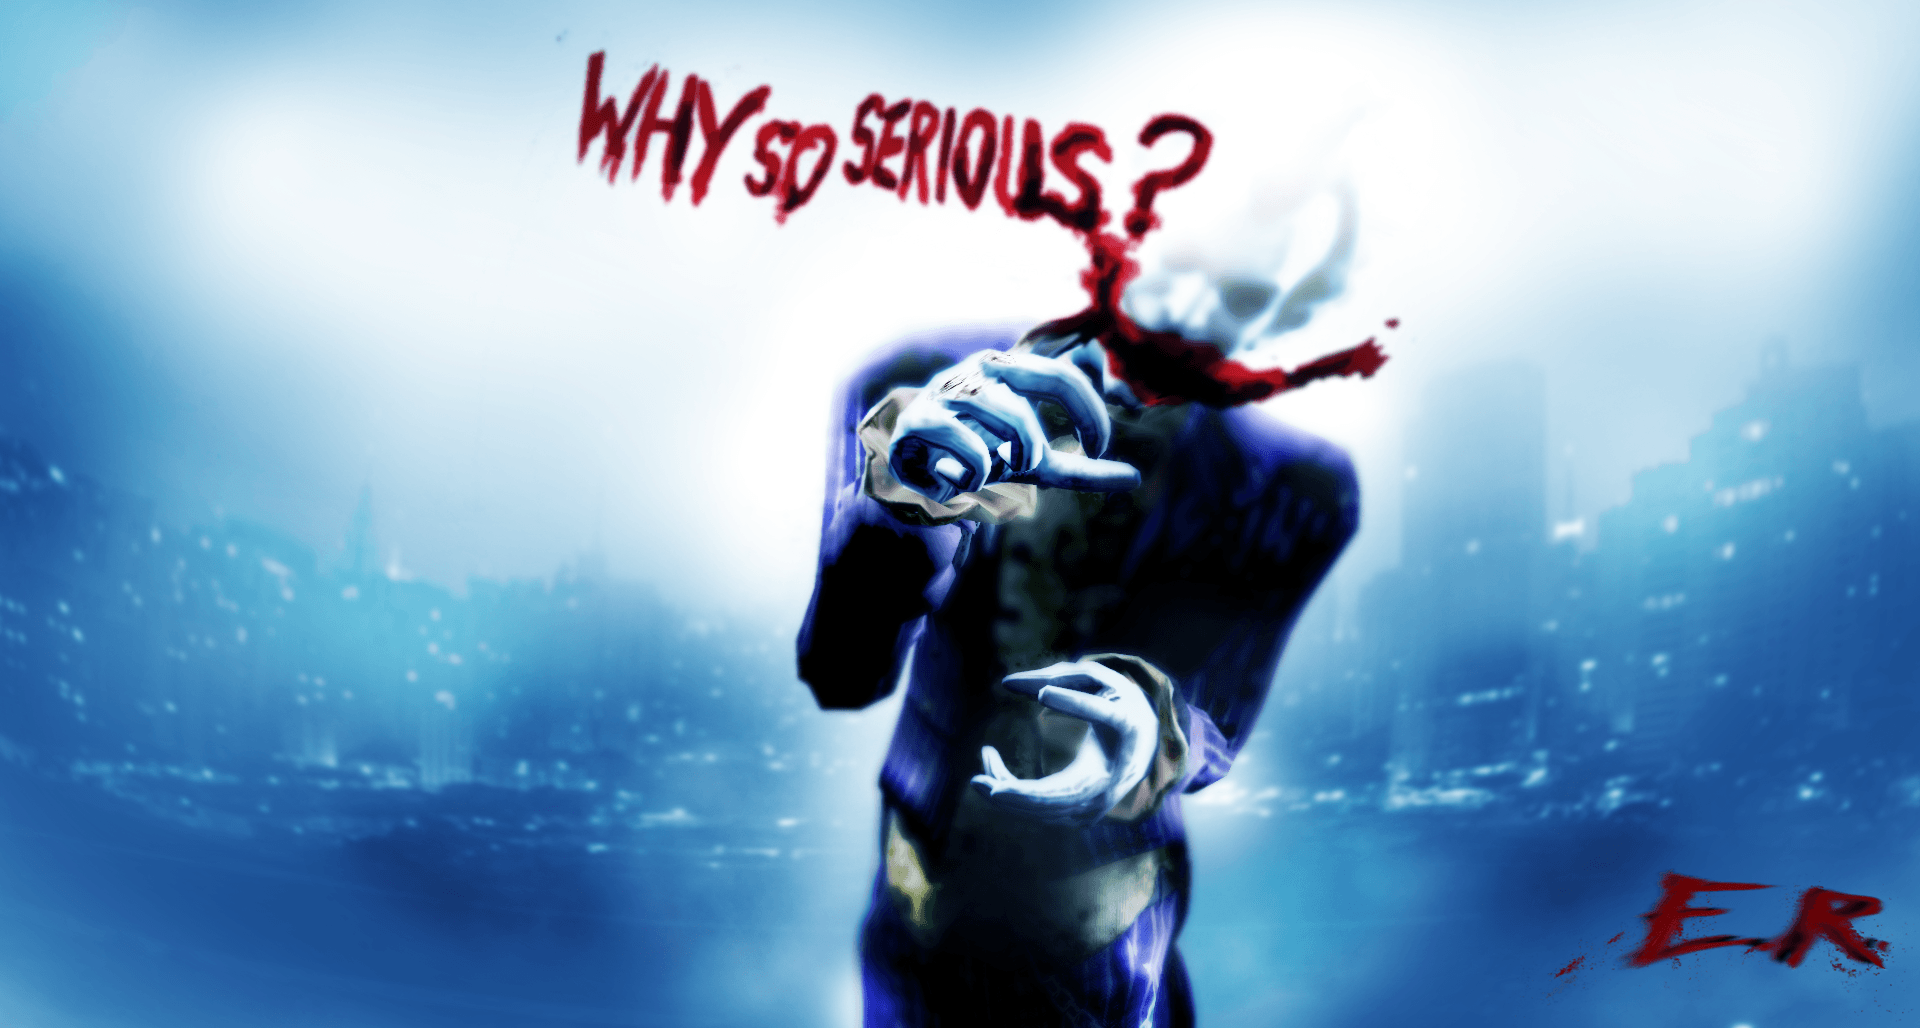 Why so serious - Amazing wallpapers for mobile phone | Facebook